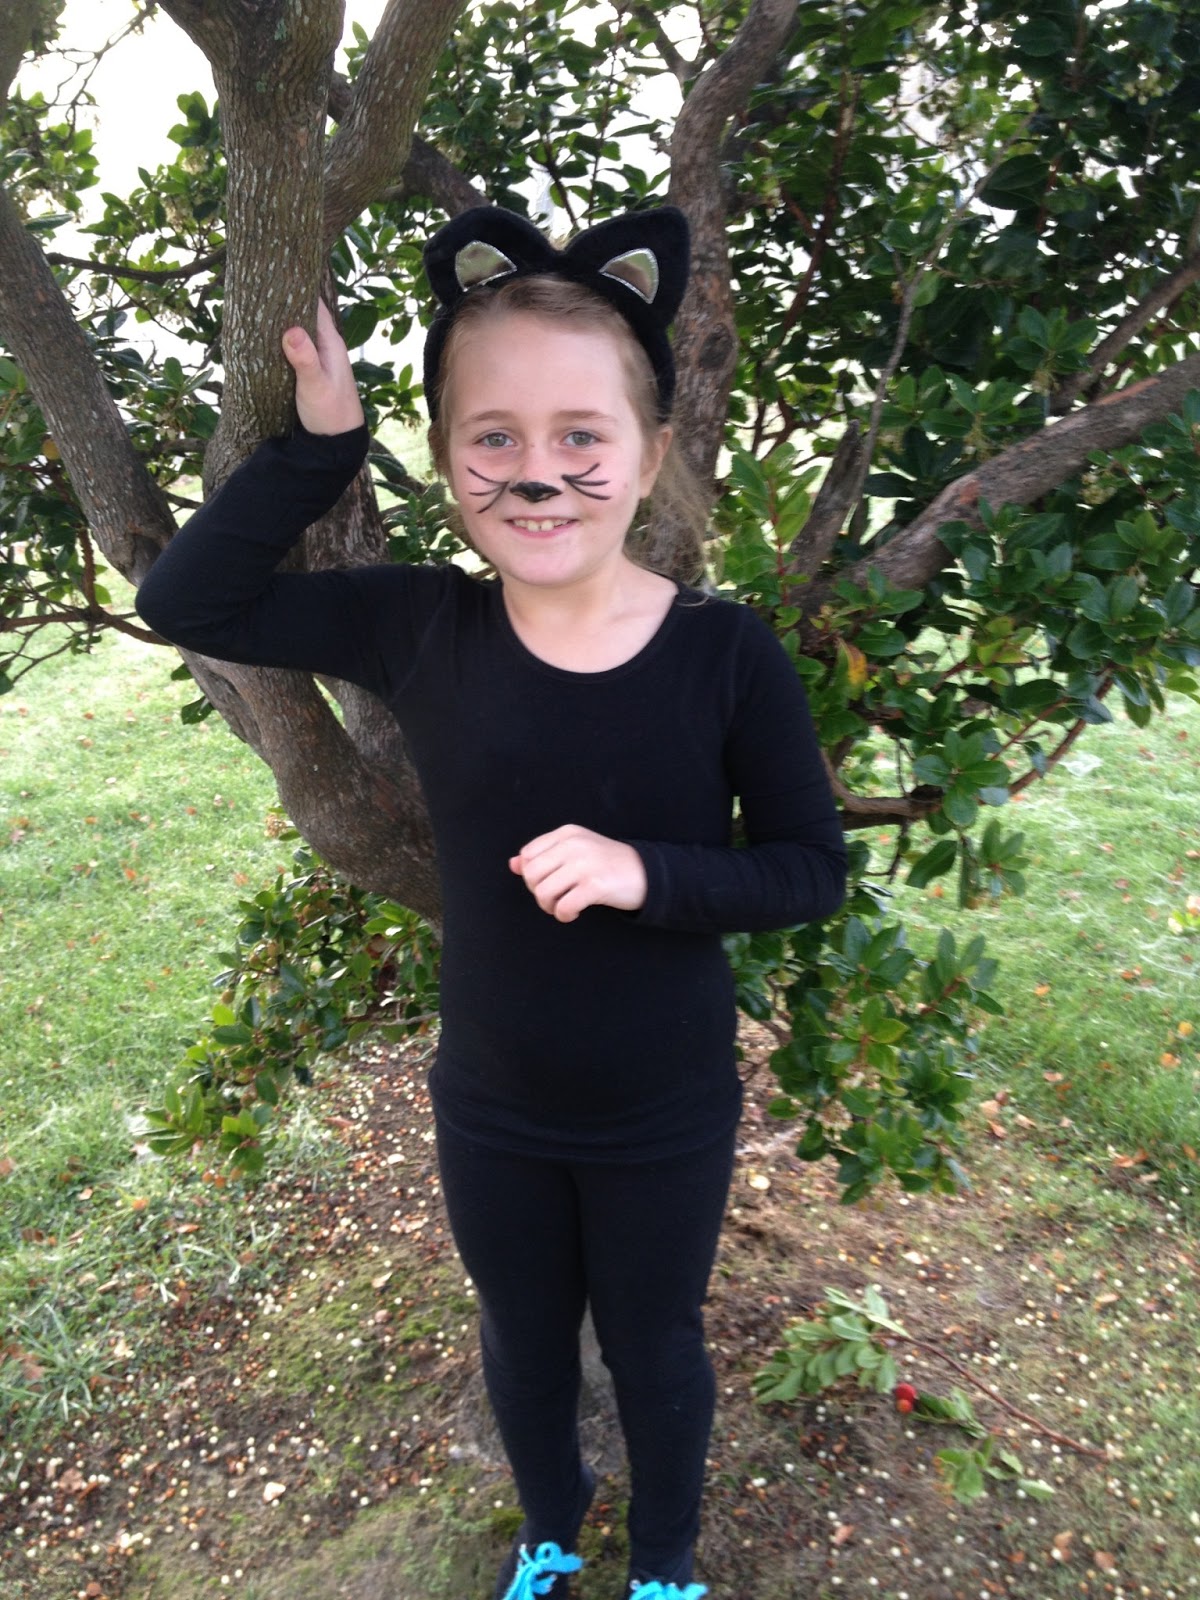 Room 4 Lawrence Area School: Book character dress up day